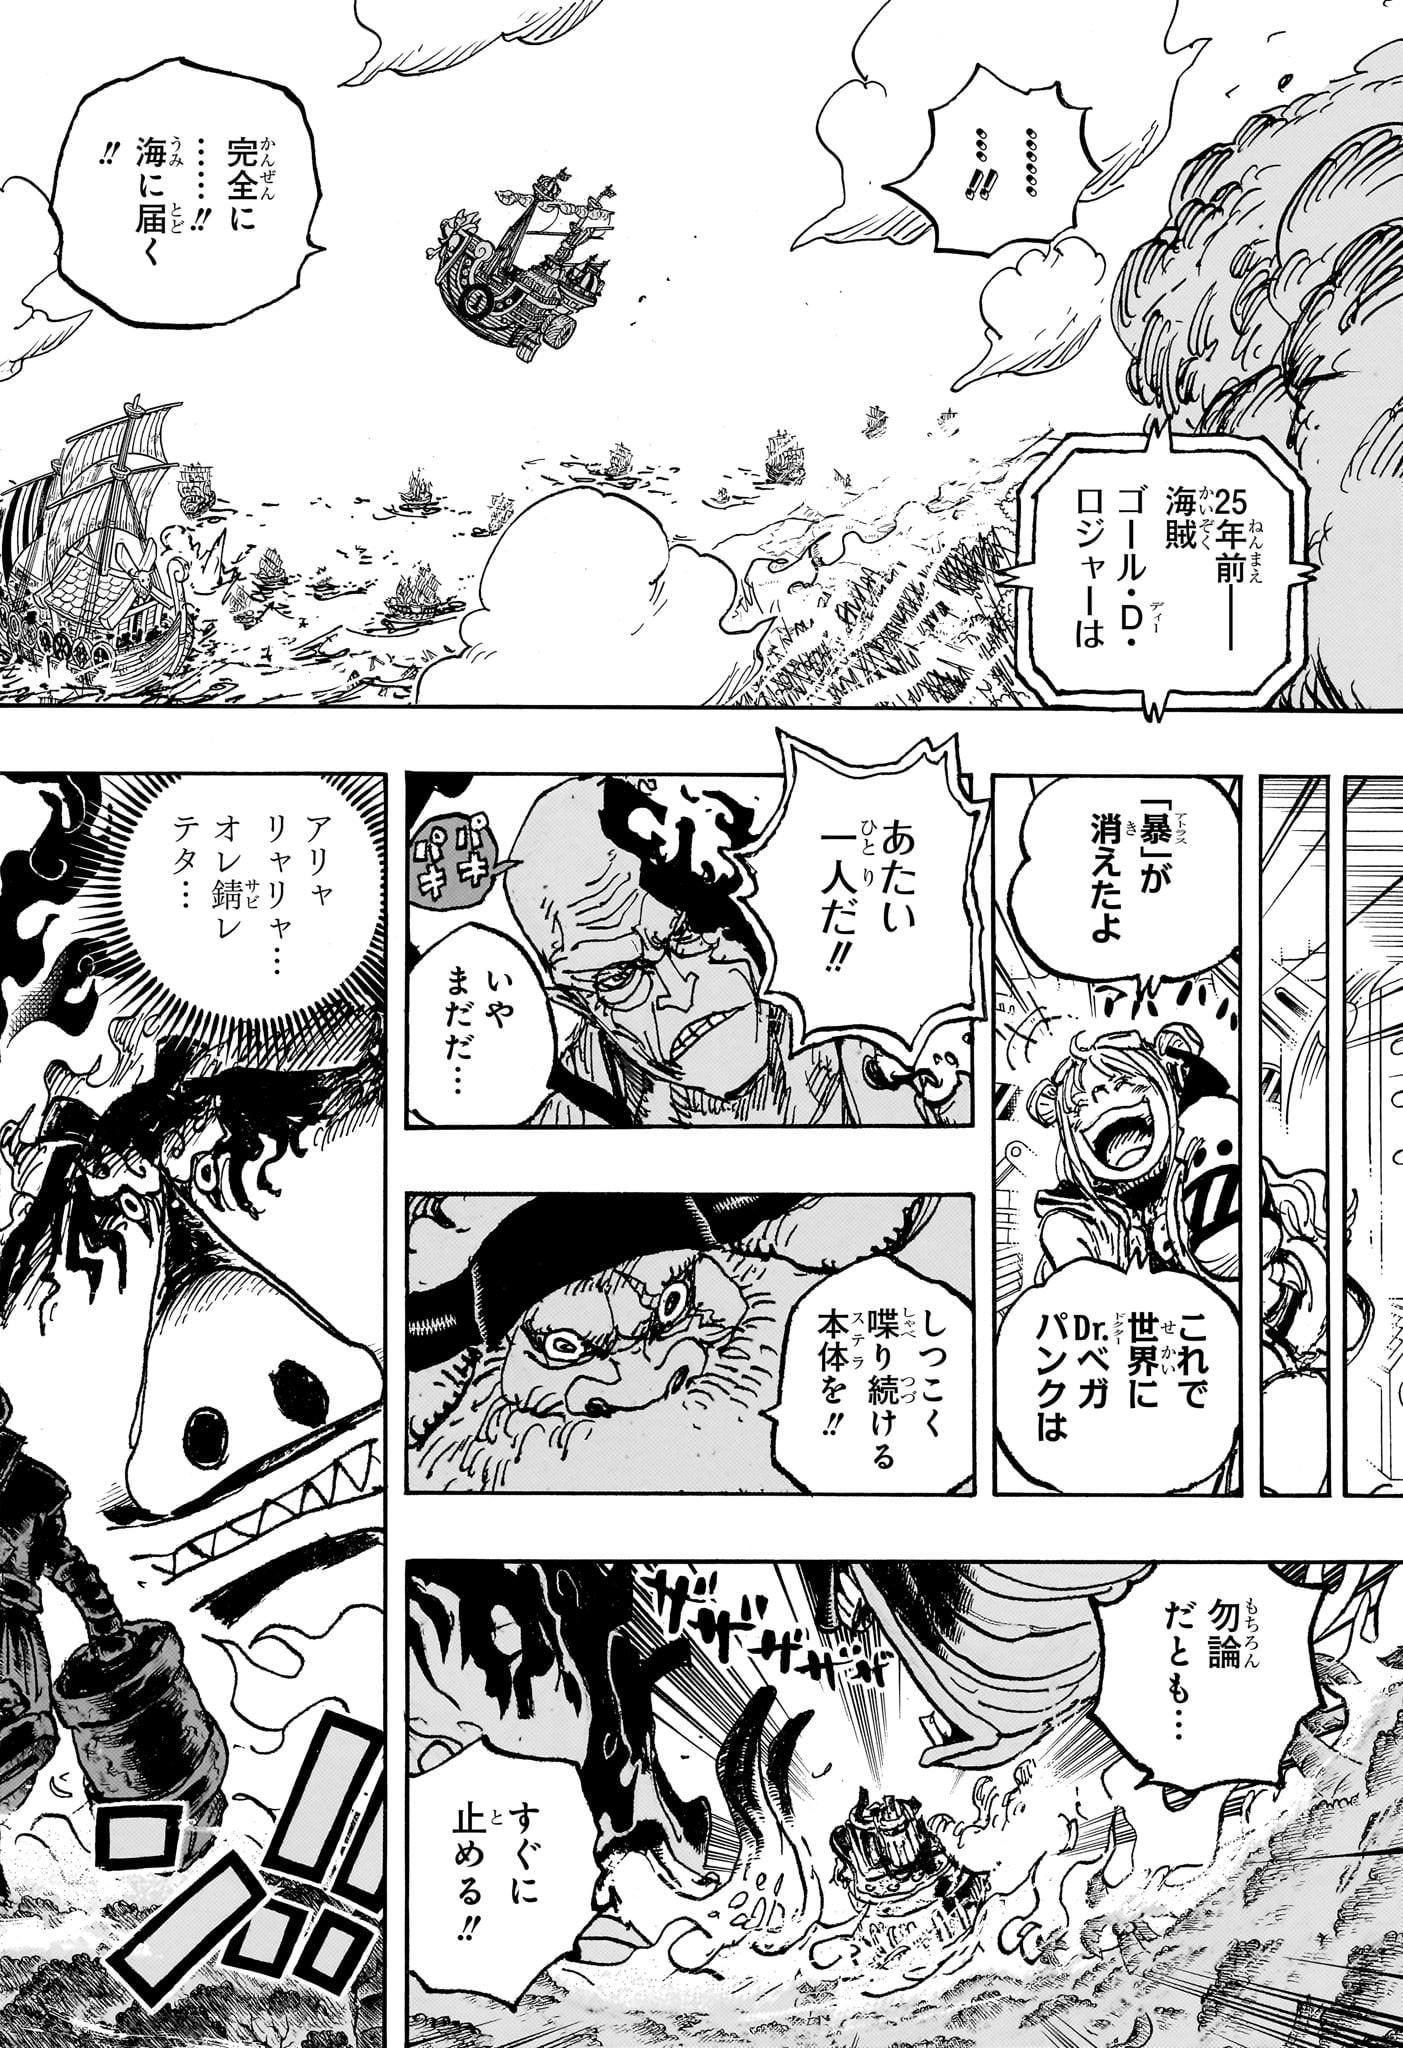 One Piece - Chapter 1120 - Page 18